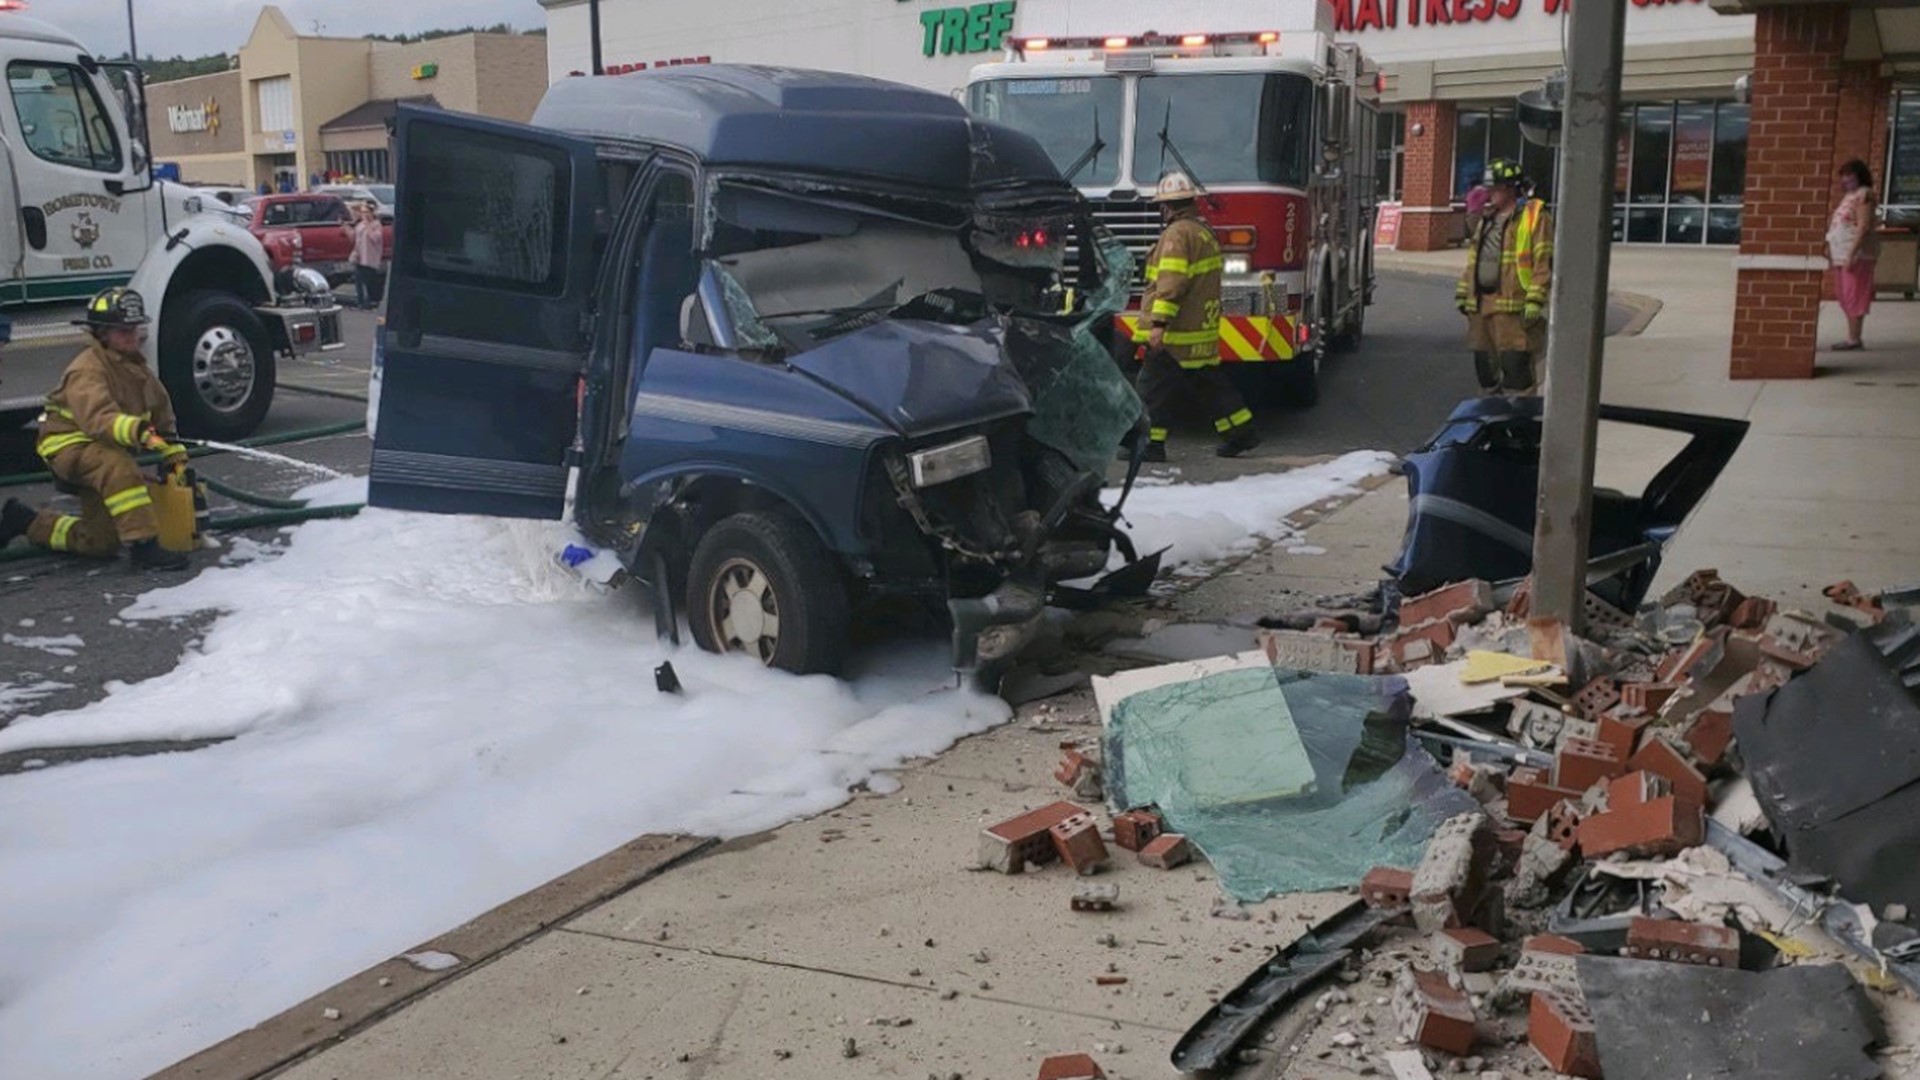 The driver of the van suffered a medical emergency and was flown to a hospital after the crash.